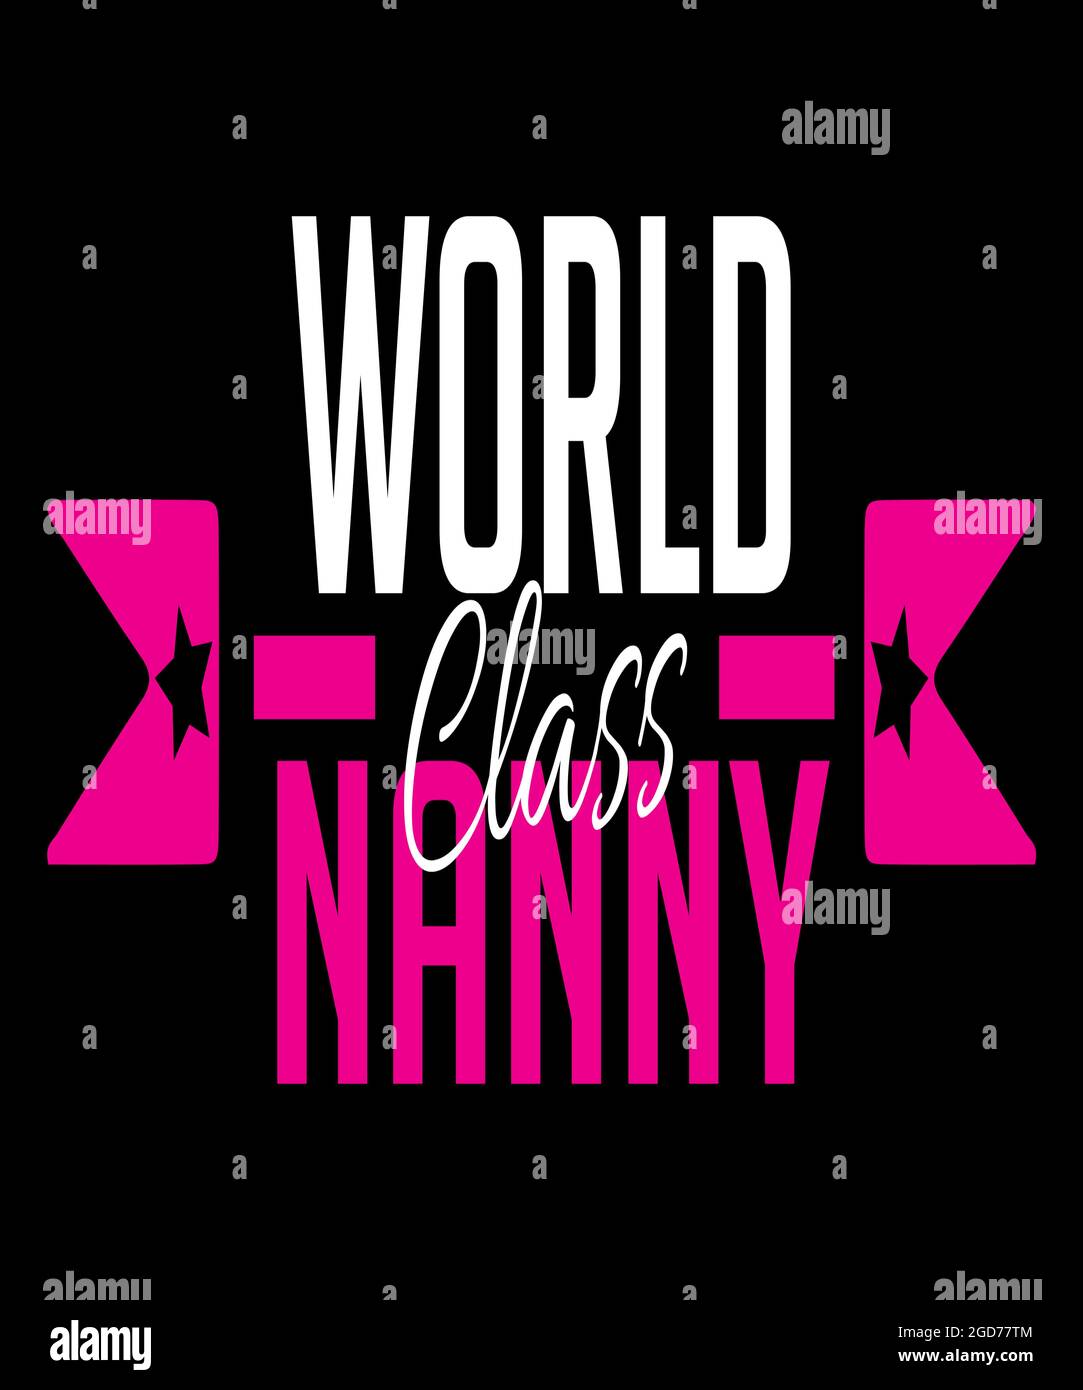 World class nanny typography with text in white and hot pink with stars. Stock Photo